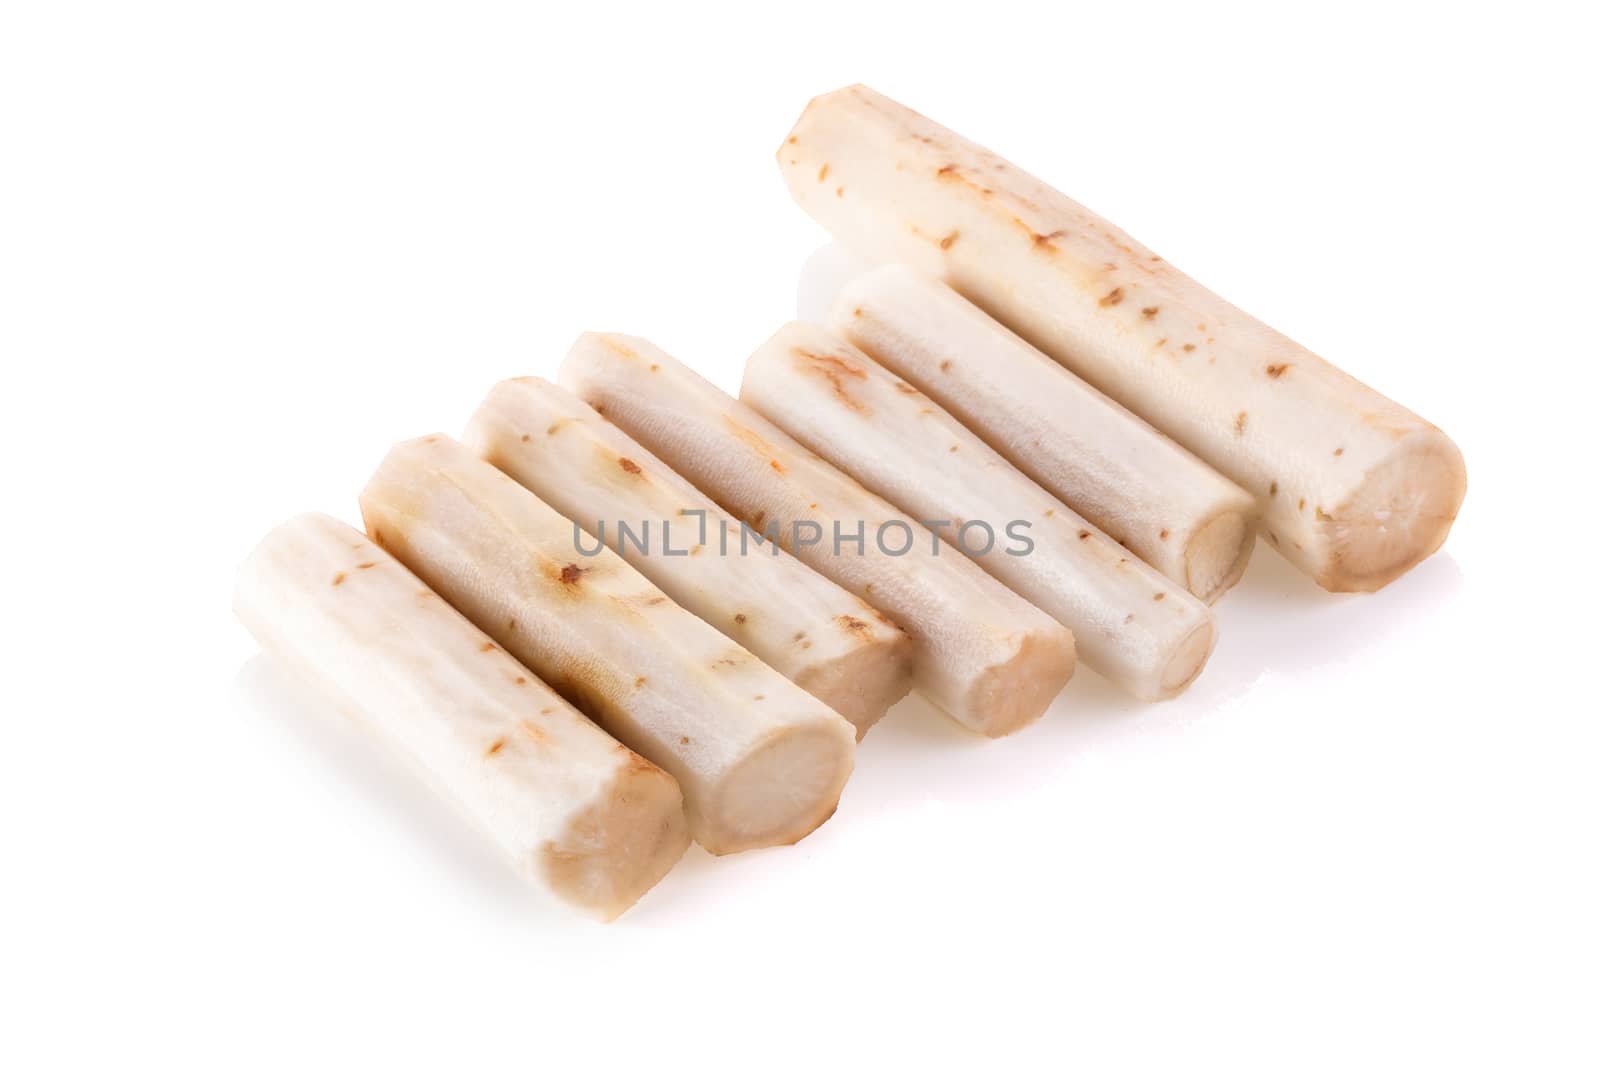 Fresh Burdock roots isolated on white background.